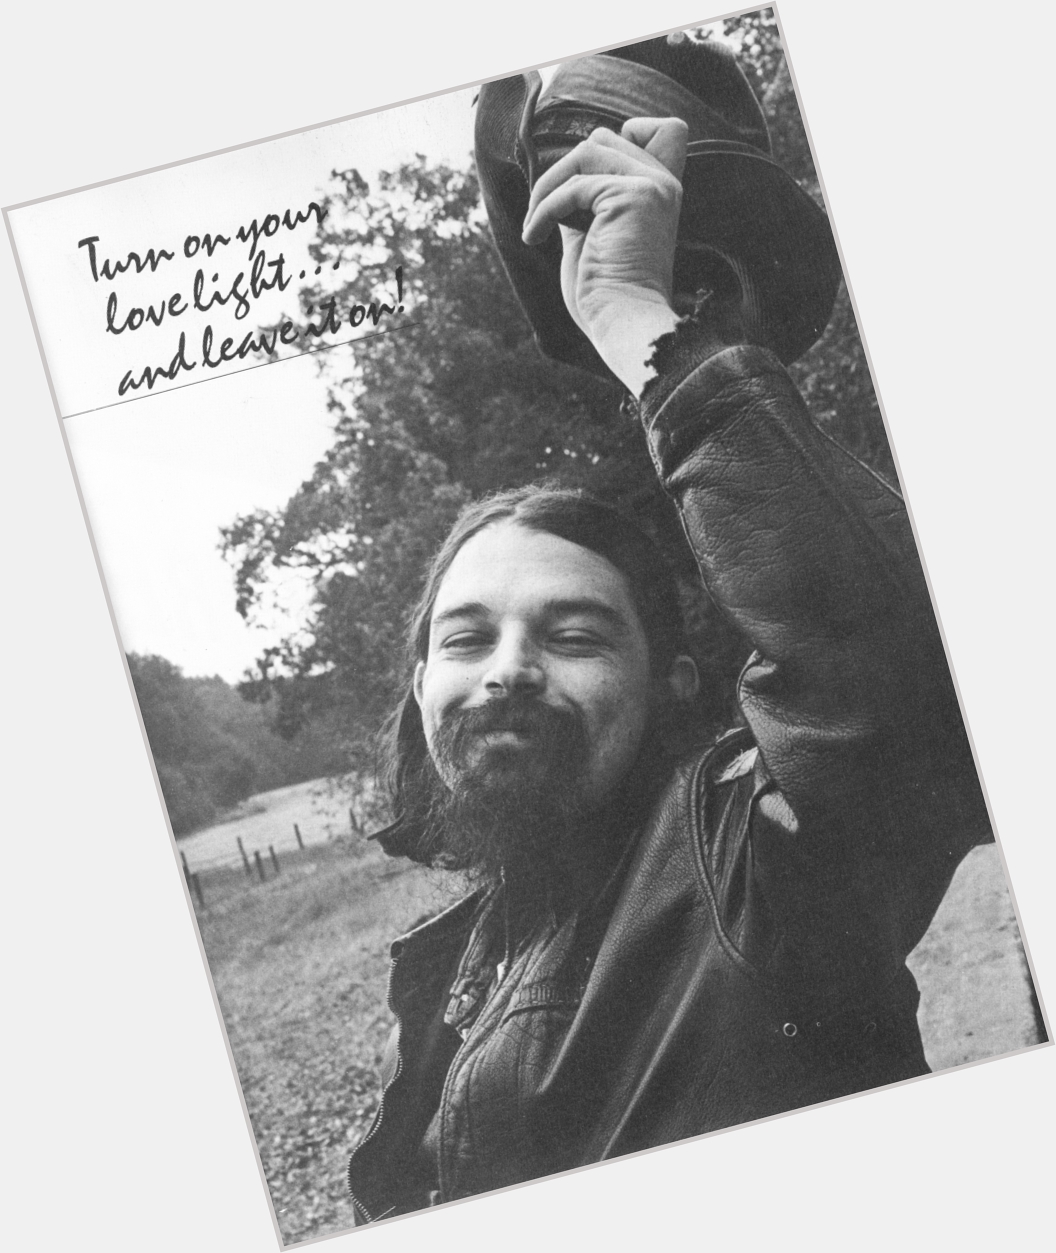 \"Turn on your LoveLight - and leave it on!\" Happy Birthday to Ron \"Pigpen\" McKernan 